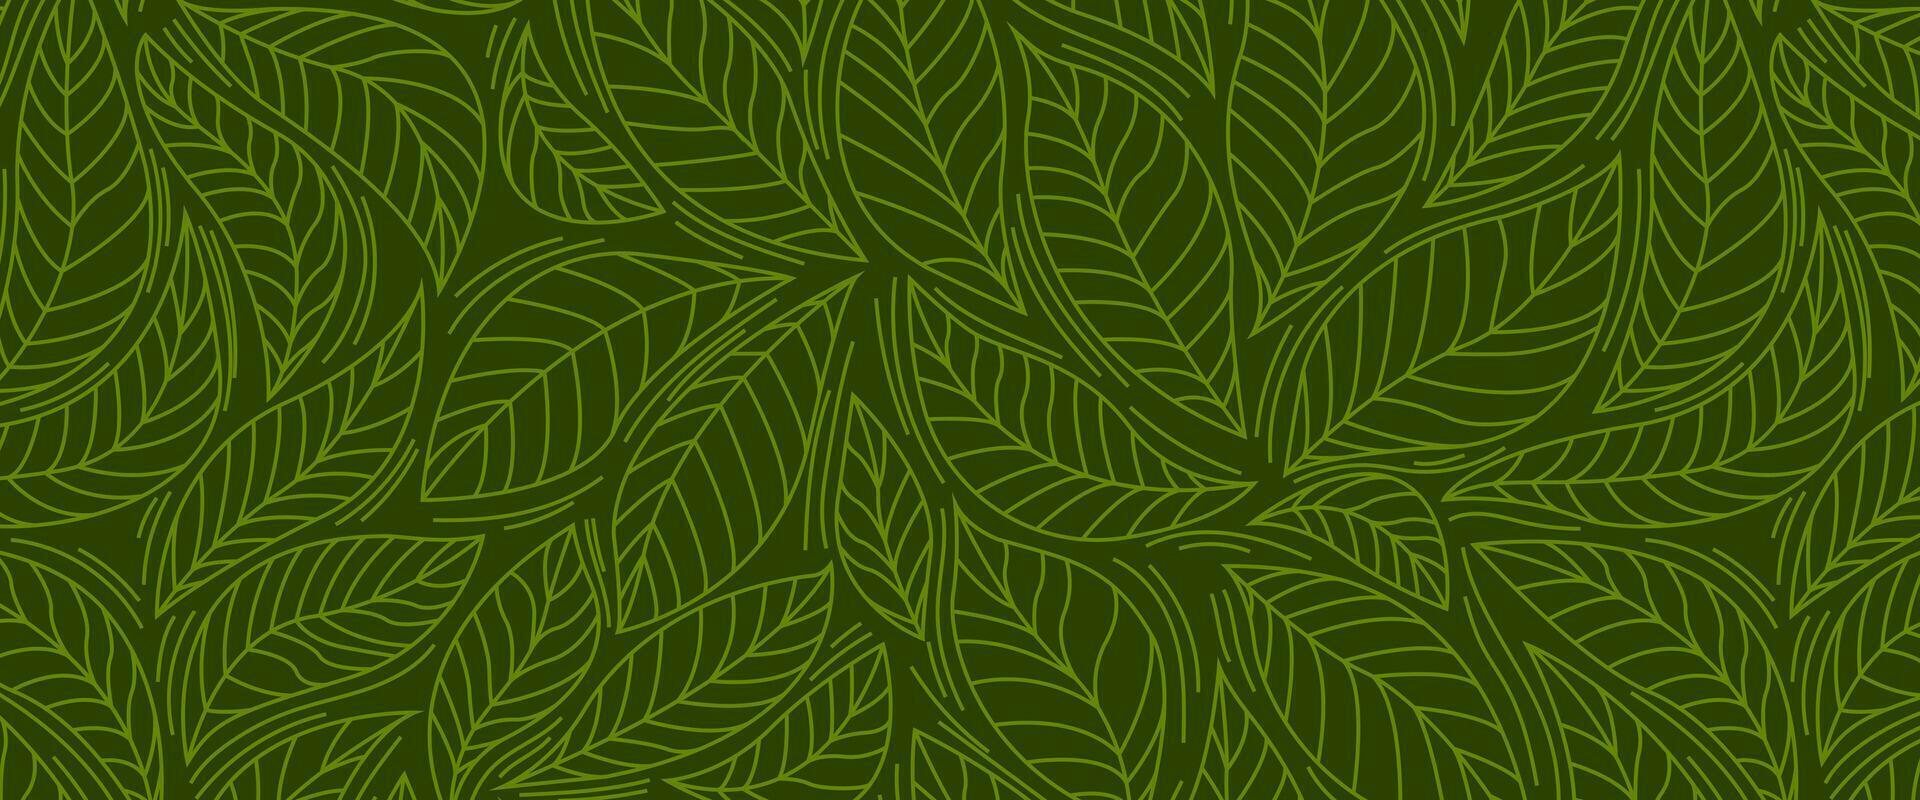 Leaves seamless pattern on green isolated background. Nature pattern design, hand drawn outline. Vector illustration for paper, cover, fabric, print, gift wrap